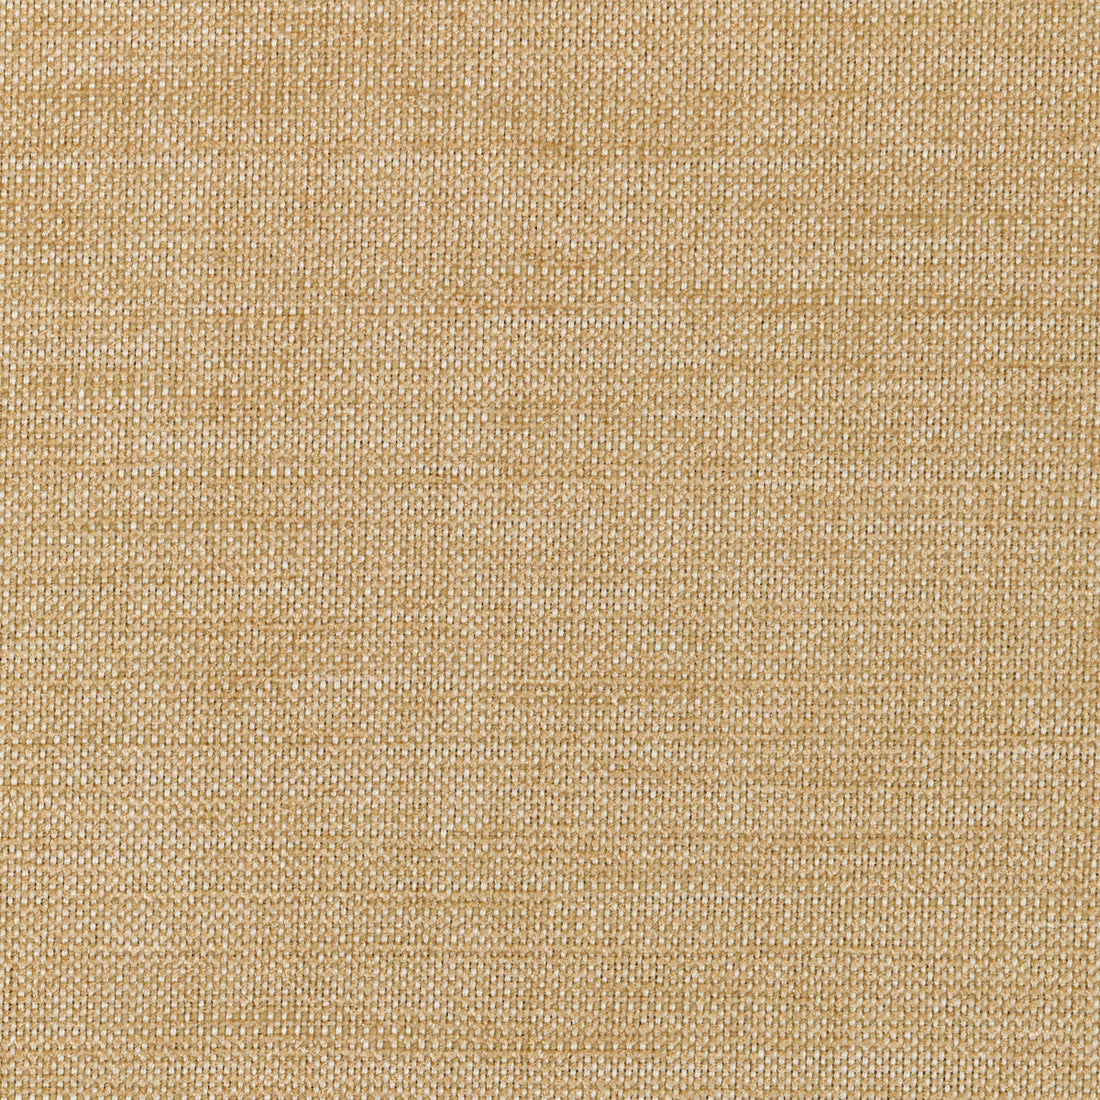 Kravet Smart fabric in 36302-16 color - pattern 36302.16.0 - by Kravet Smart in the Performance Crypton Home collection